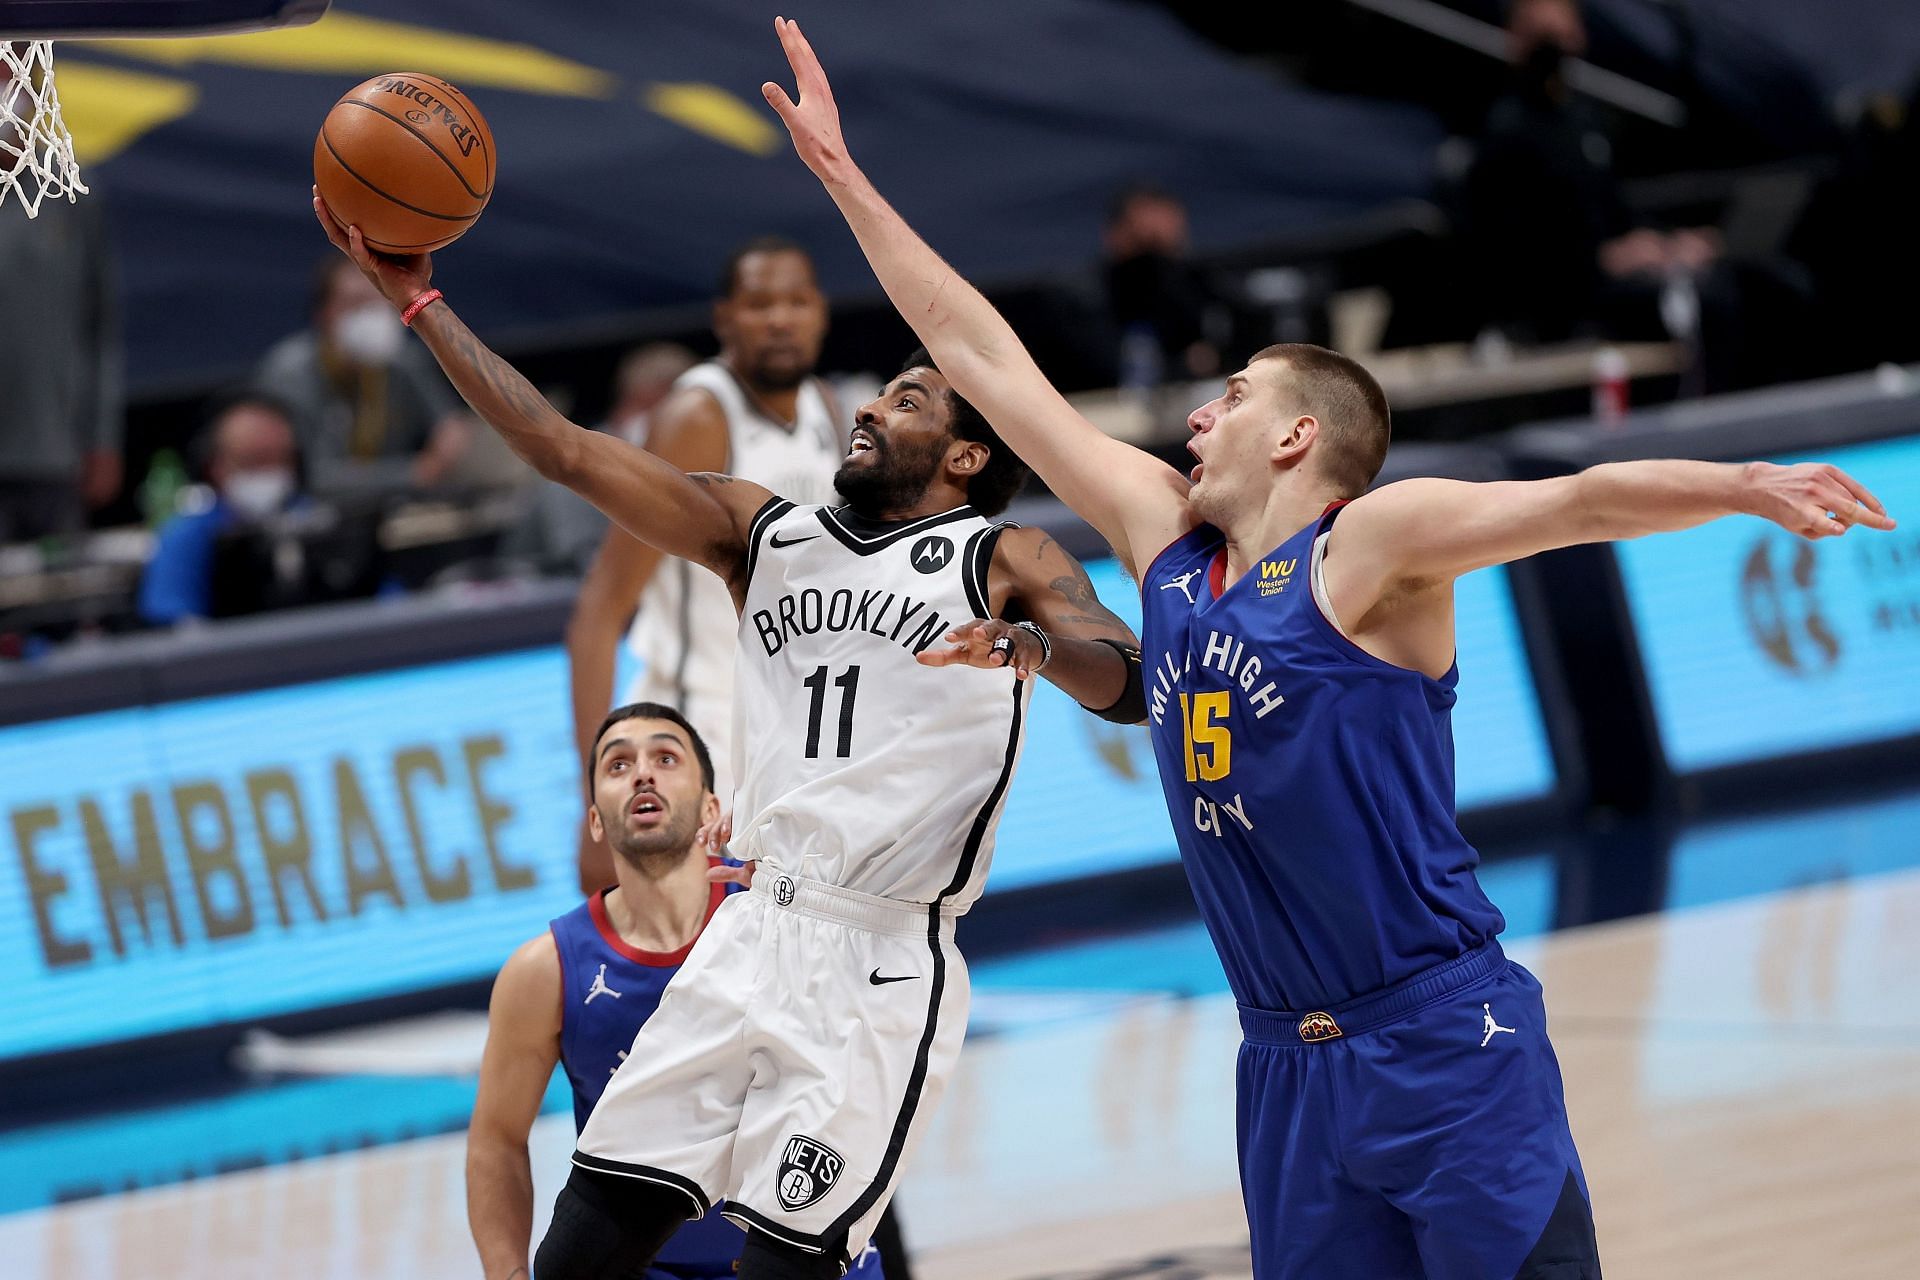 Kyrie Irving of the Brooklyn Nets drives against Nikola Jokic of the Denver Nuggets